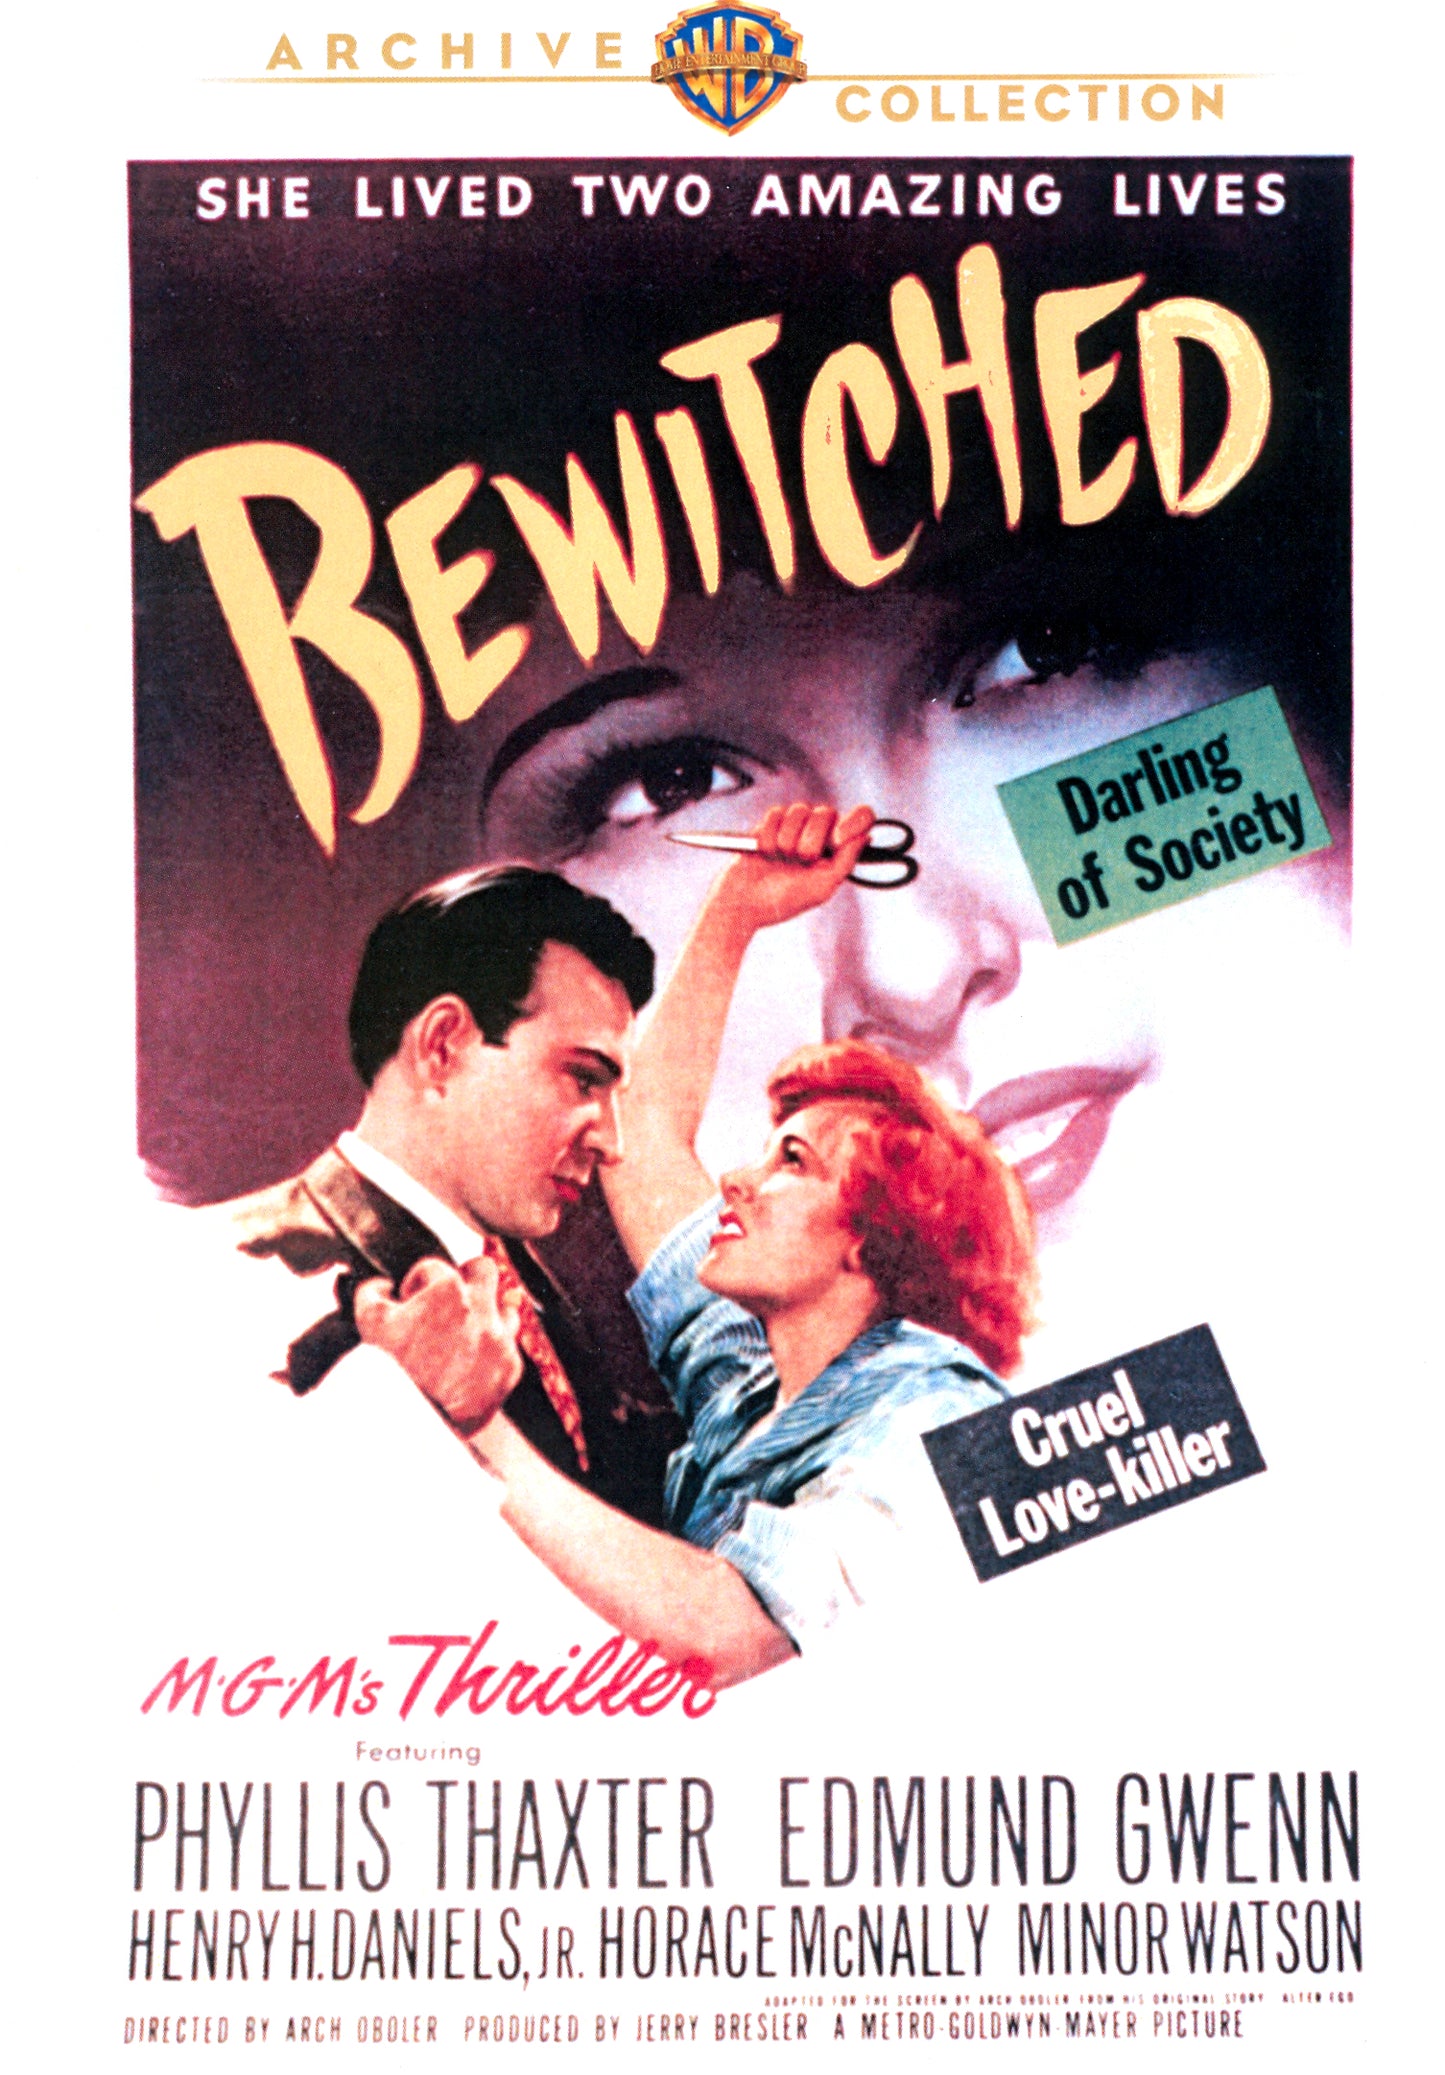 Bewitched cover art